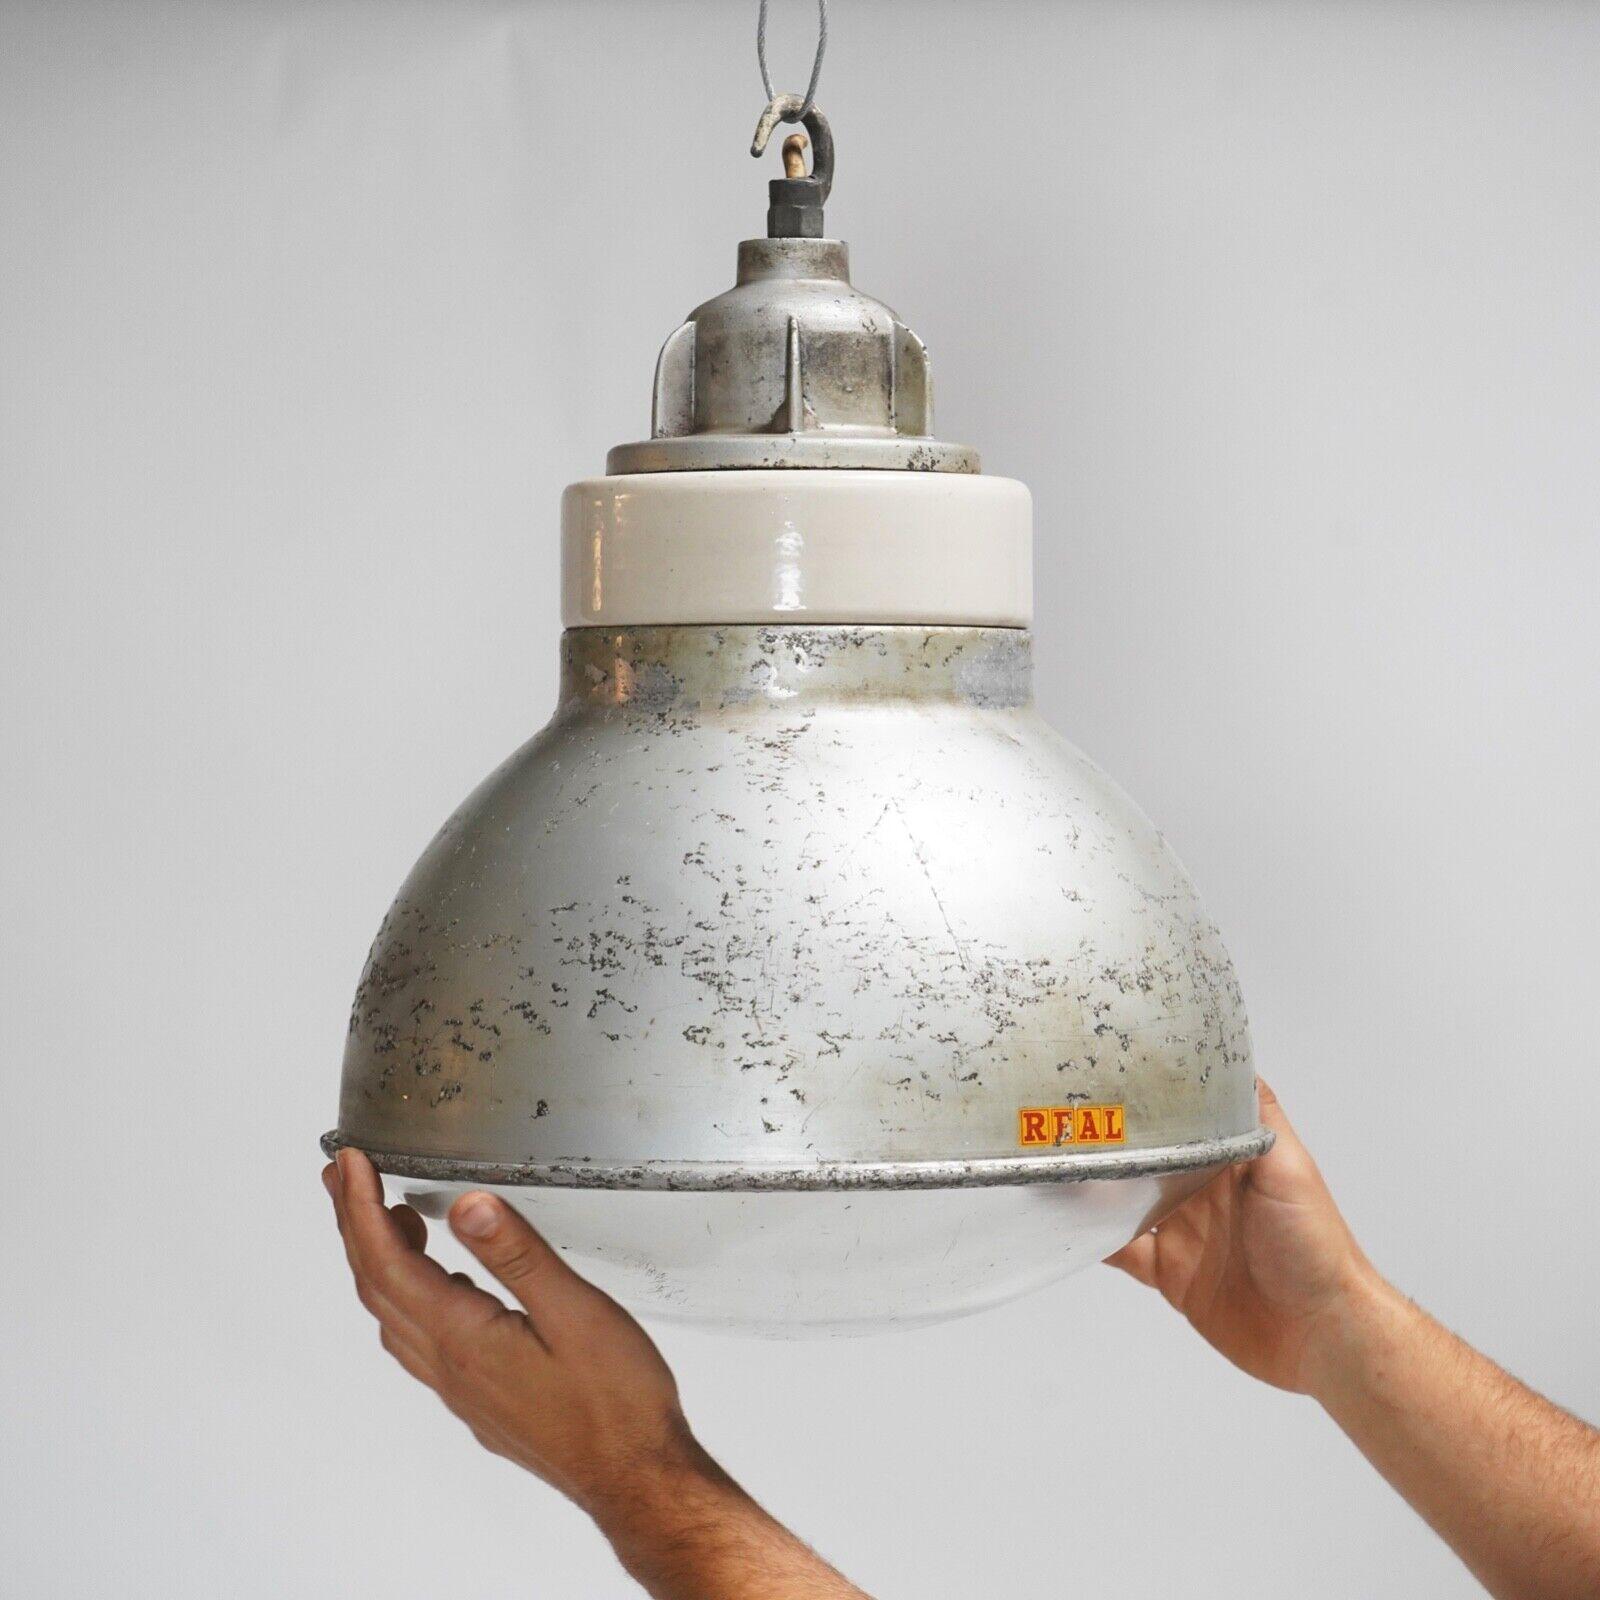 We have 1 original industrial factory pendant Reflector light left. Made by British maker Simplex, each has a brushed aluminium cutter casing, and porcelain & aluminium upper gallery. They all have a lovely REAL stamp in video red and yellow and